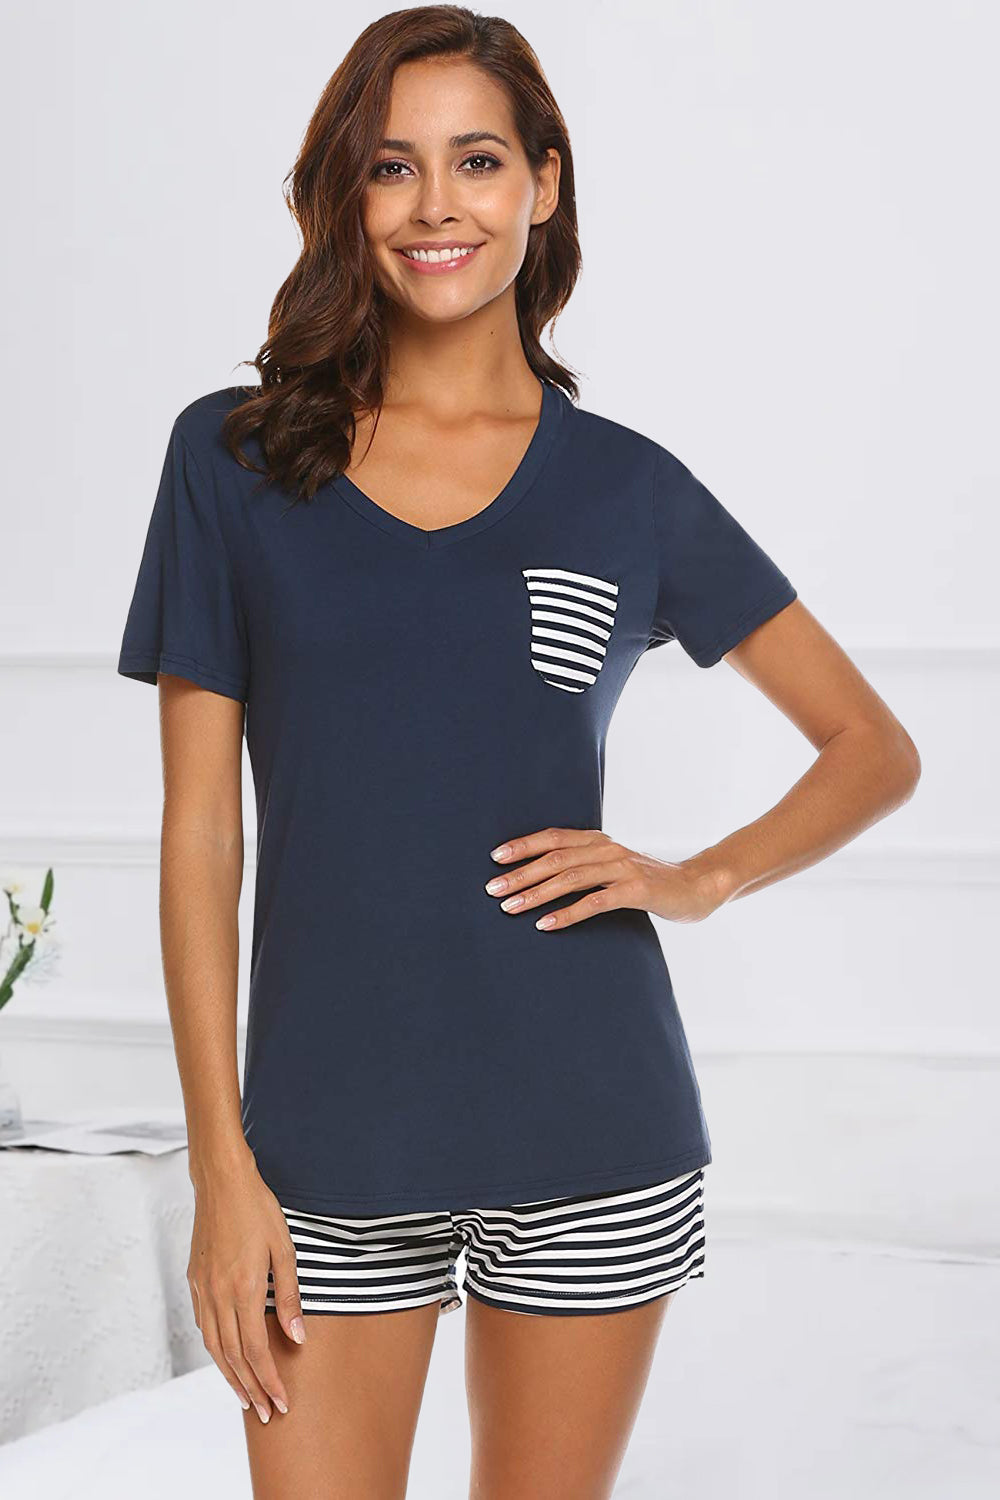 Unwind in style with our chic Striped Short Sleeve Top and Shorts Lounge Set. Soft, breathable fabric meets effortless elegance for ultimate comfort.